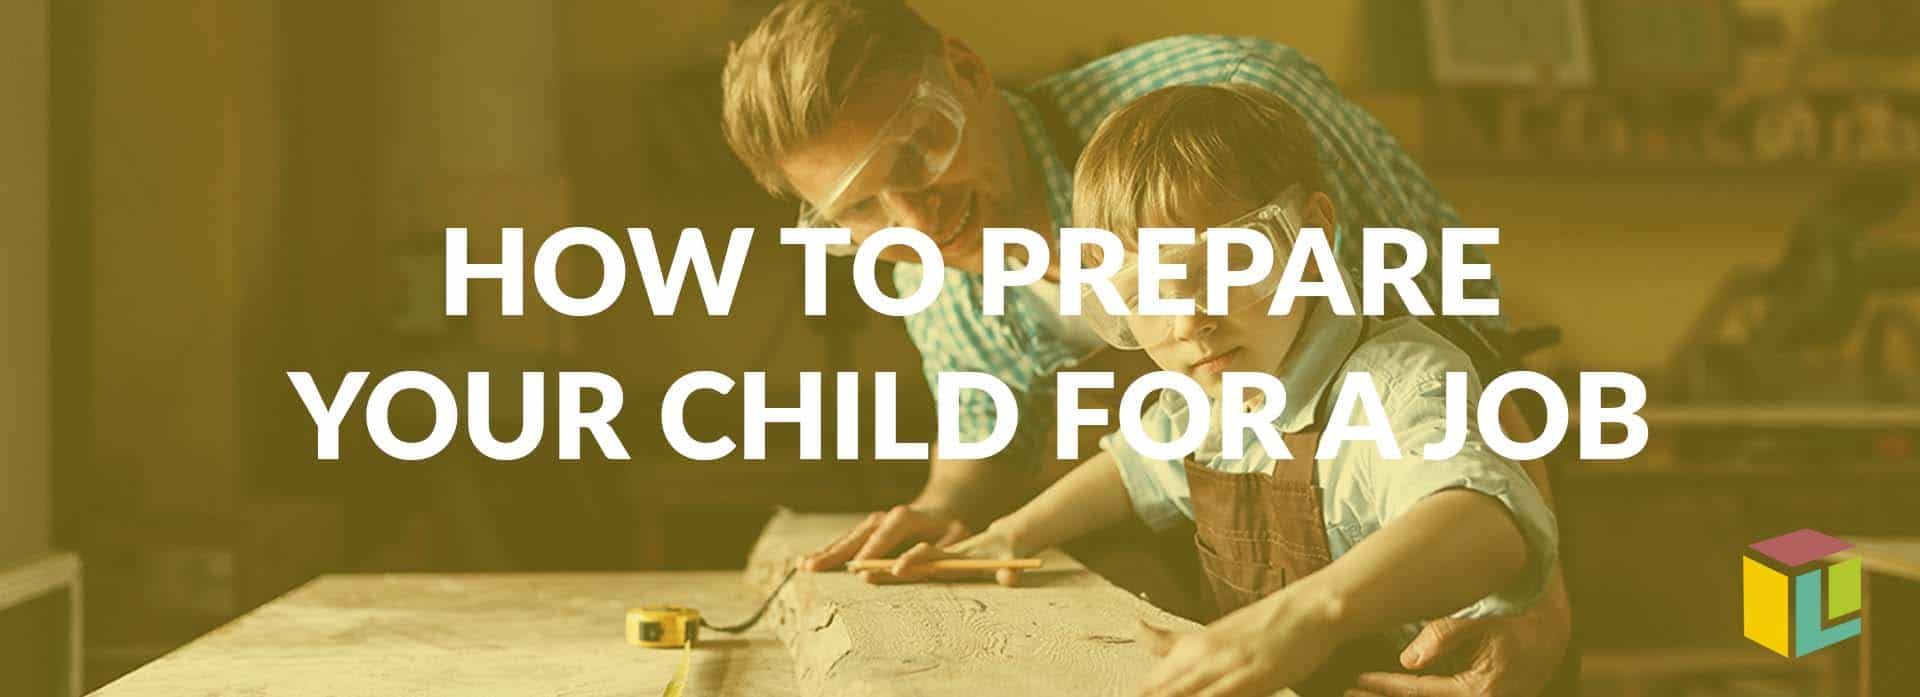 How To Prepare Your Child For A Job How To Prepare Your Child For A Job How To Prepare Your Child For A Job How To Prepare Your Child For A Job